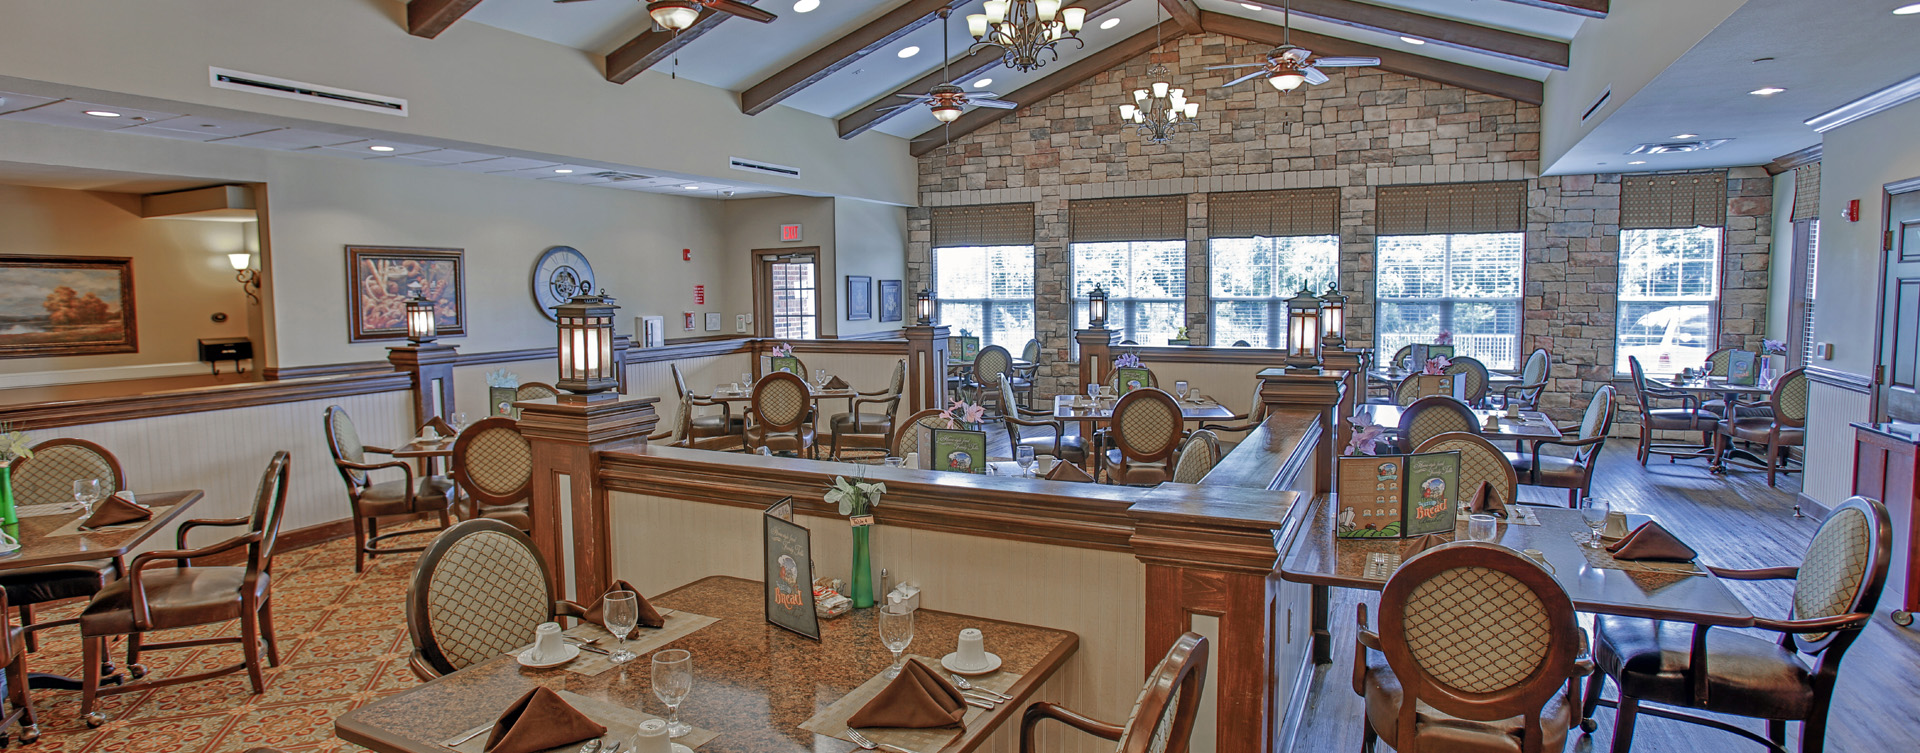 Enjoy homestyle food with made-from-scratch recipes in our dining room at Bickford of Greenwood